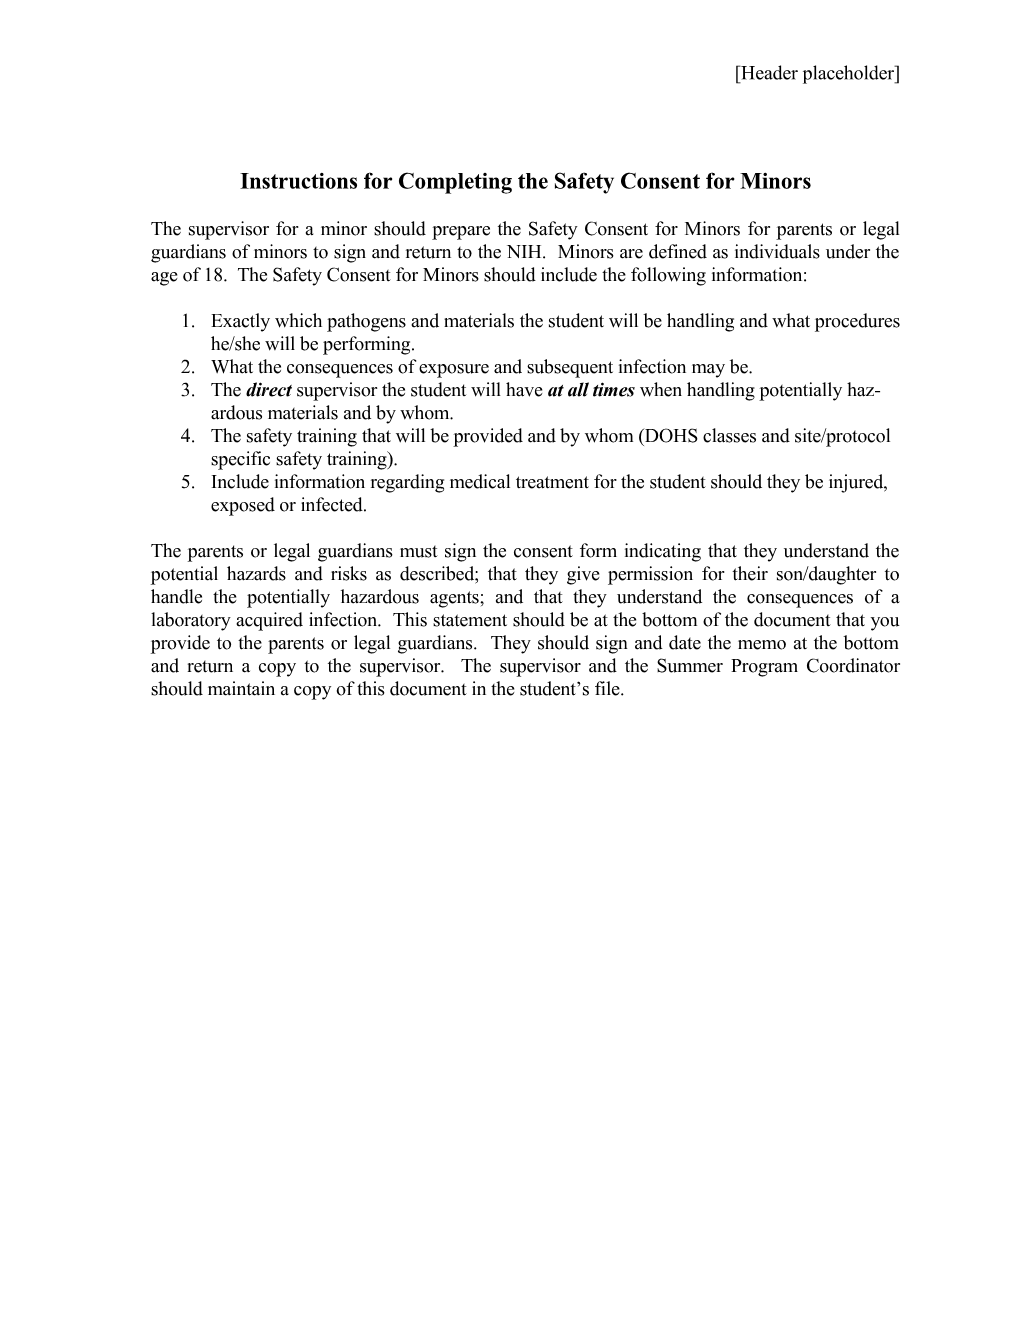 Instructions for Completing the Safety Consent for Minors